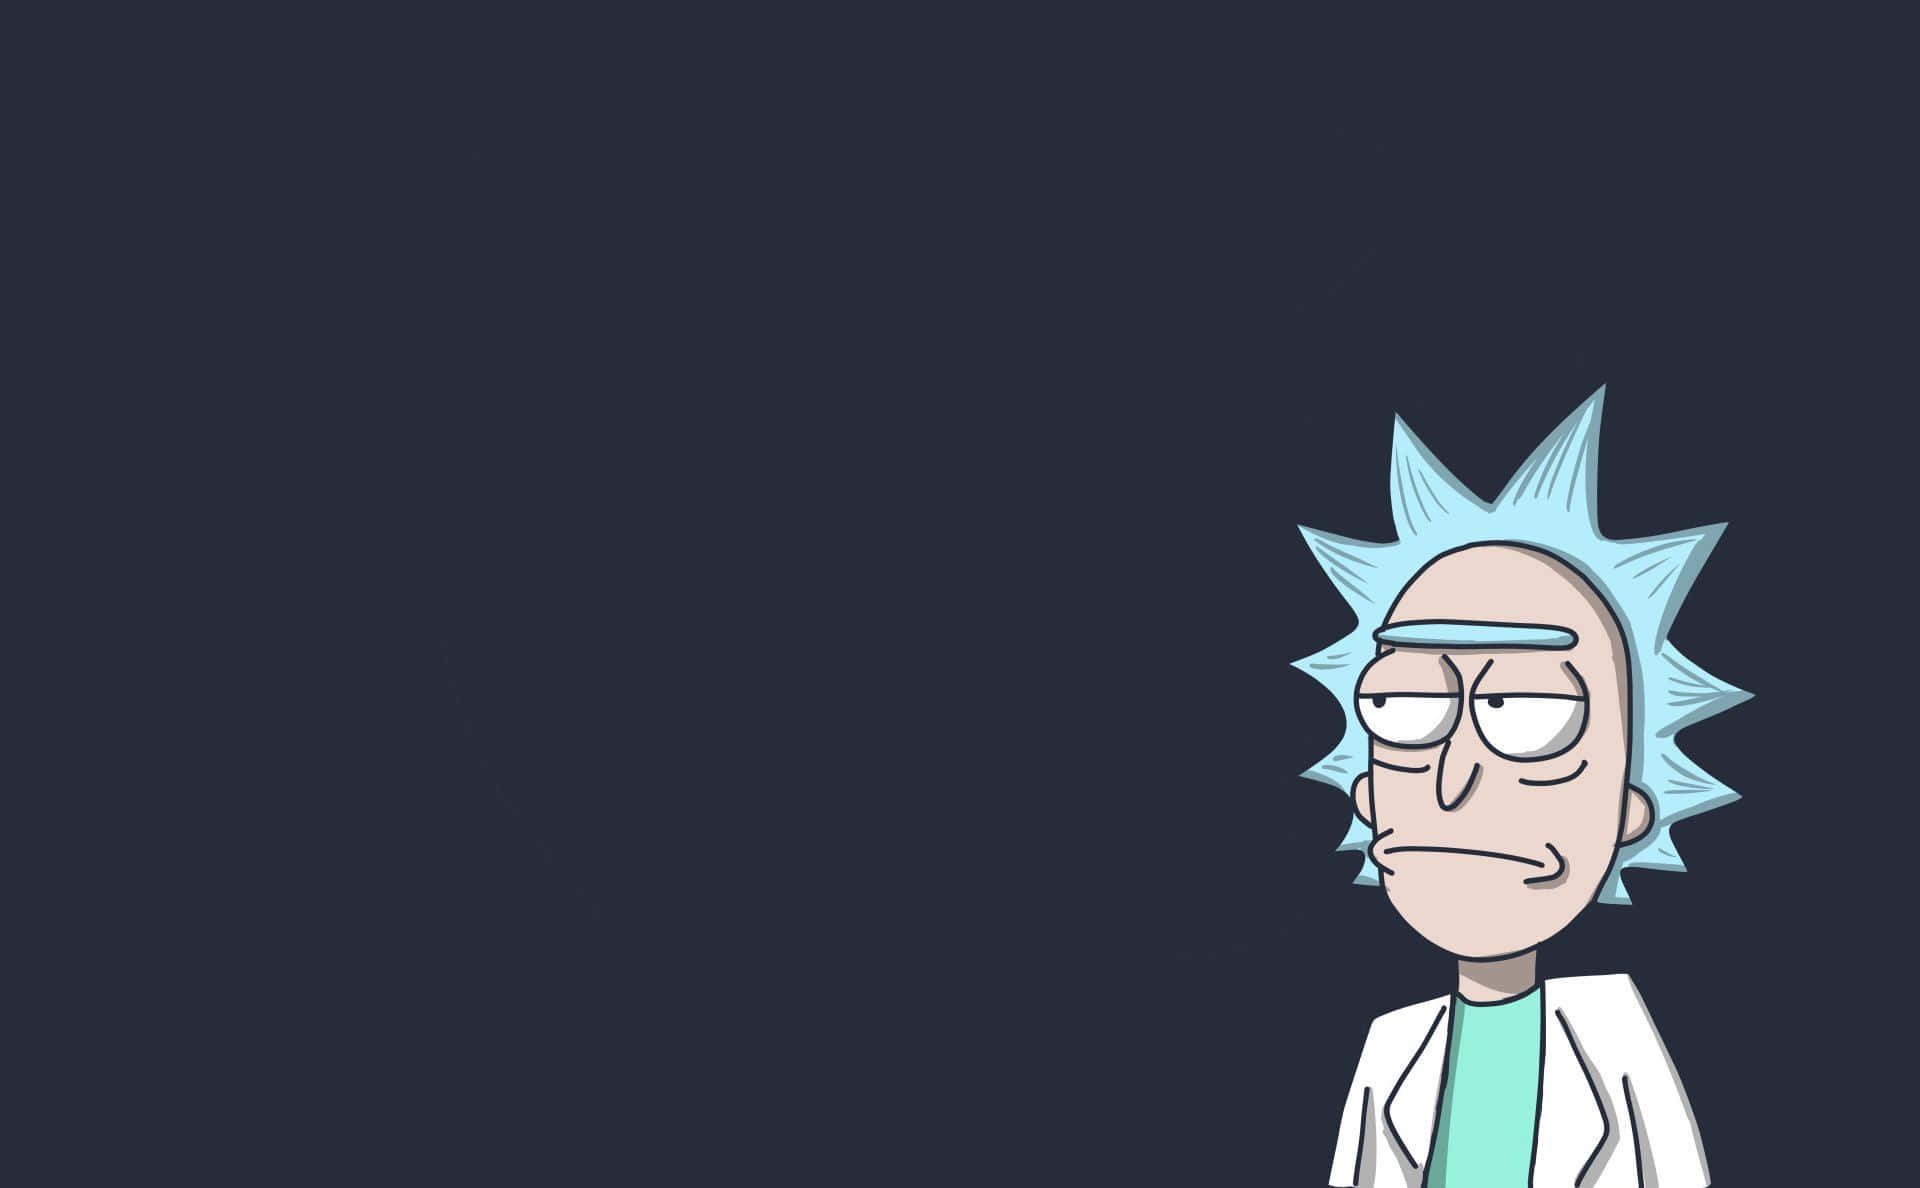 Get ready for interdimensional adventures with the Rick and Morty laptop. Wallpaper